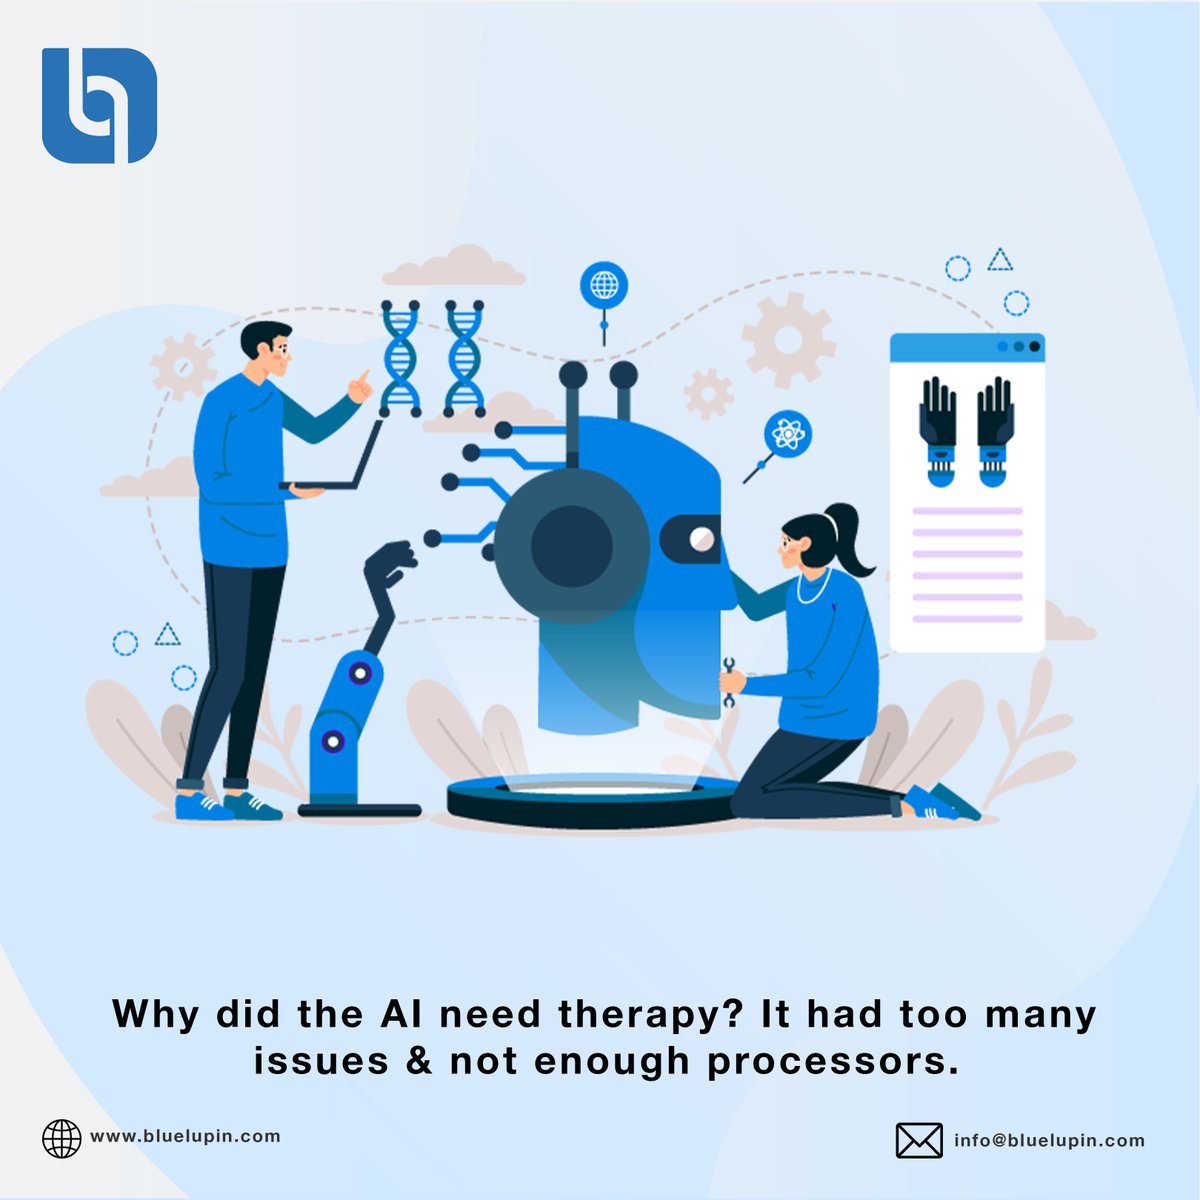 What is your favorite AI service right now? 

Let us know!

#bluelupin #AI #AIservice